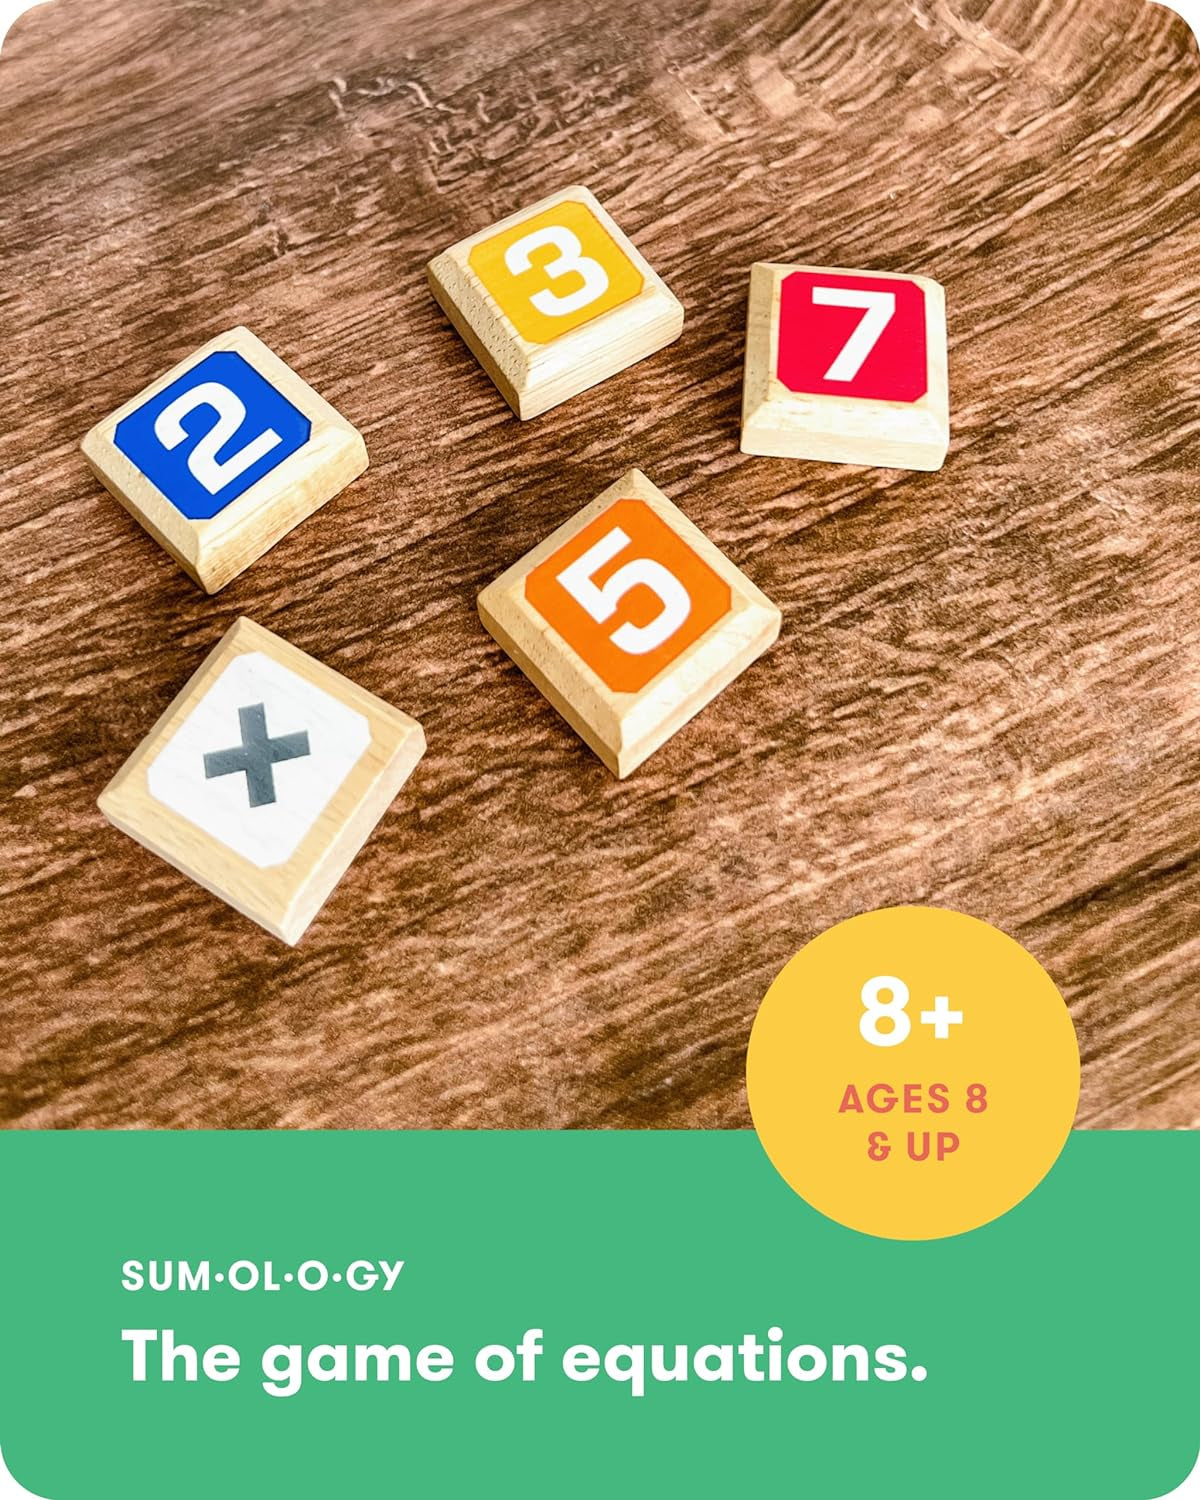 Simplyfun Sumology Math Game - One of the Most Fun Math Games for Kids Ages 8-12 - Practice Addition, Subtraction, Multiplication and Division - 2 or More Players or Play in Teams!